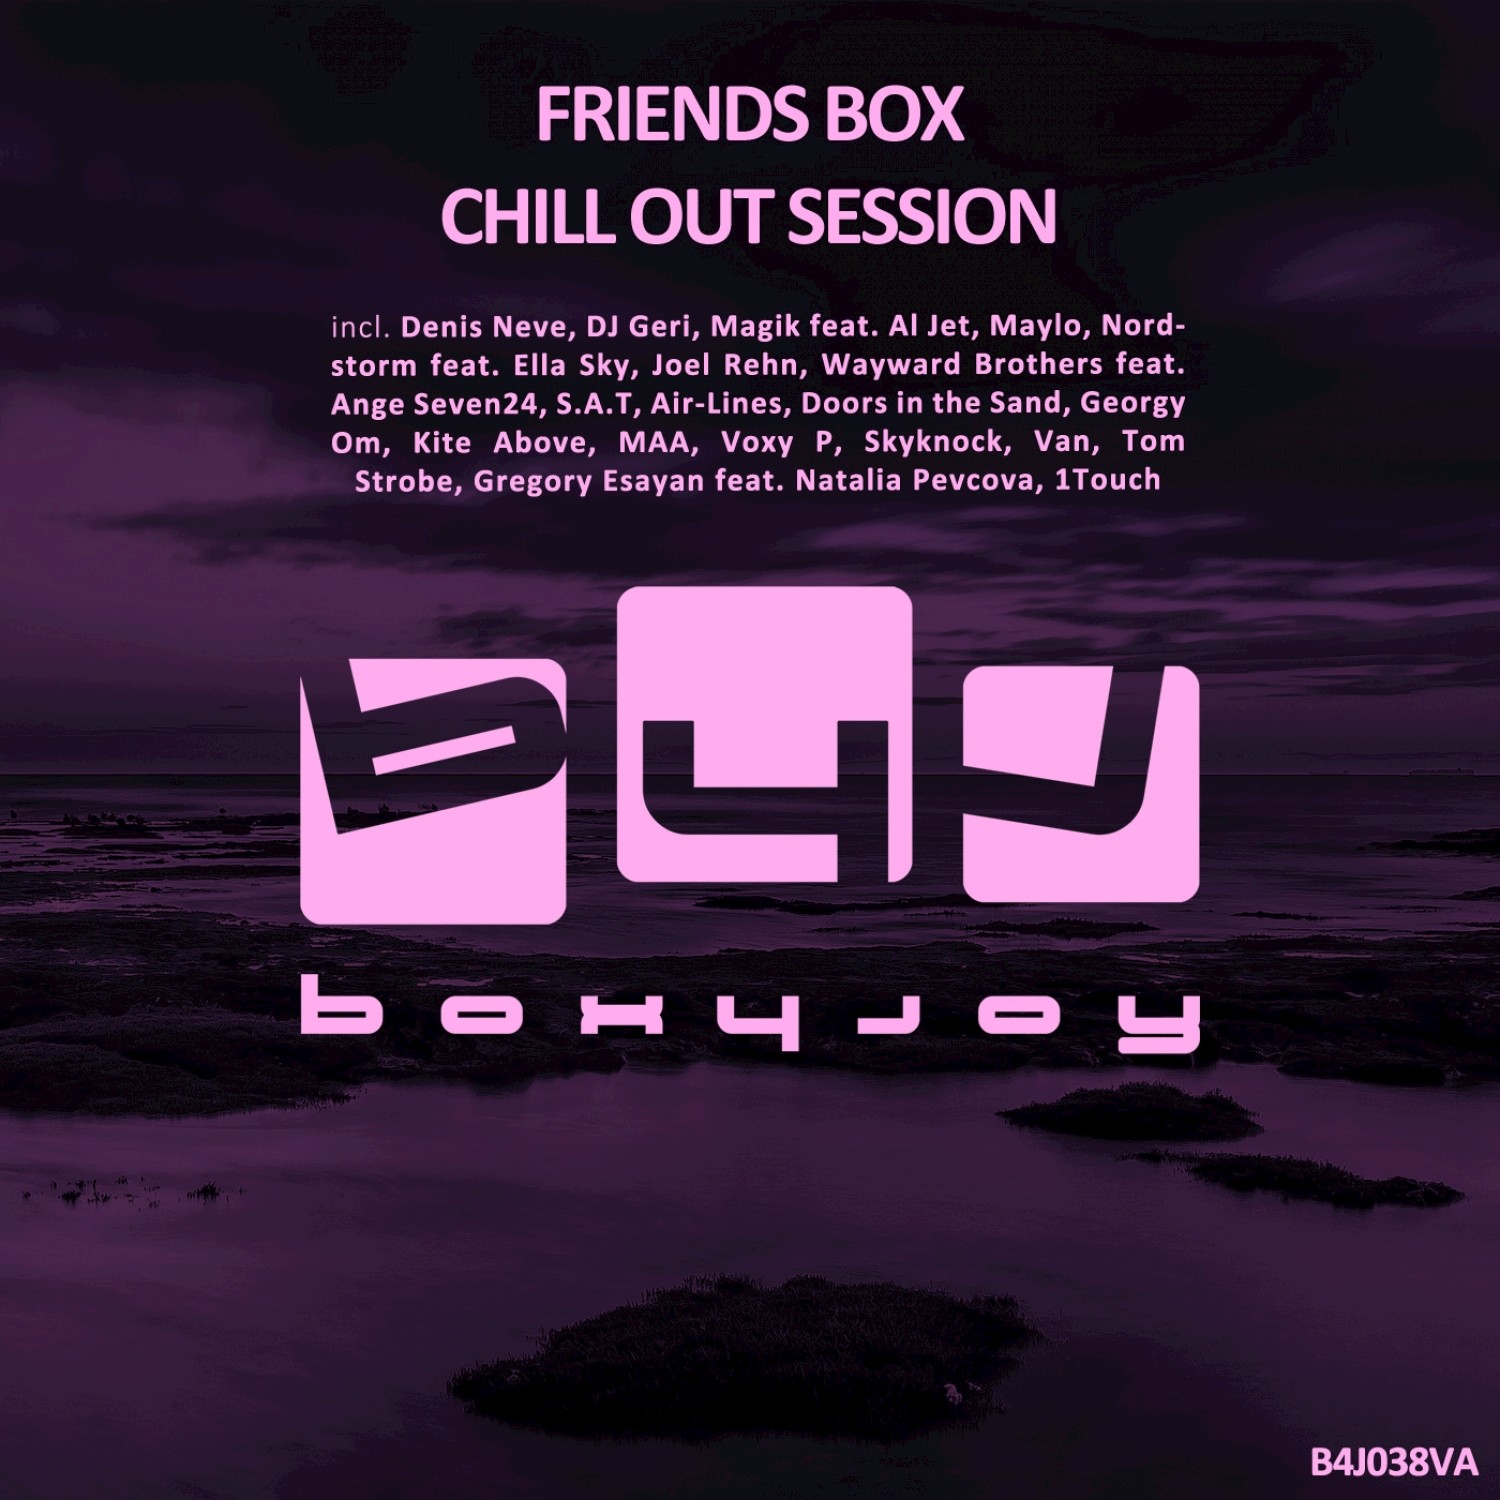 Friends Box Chill out Session